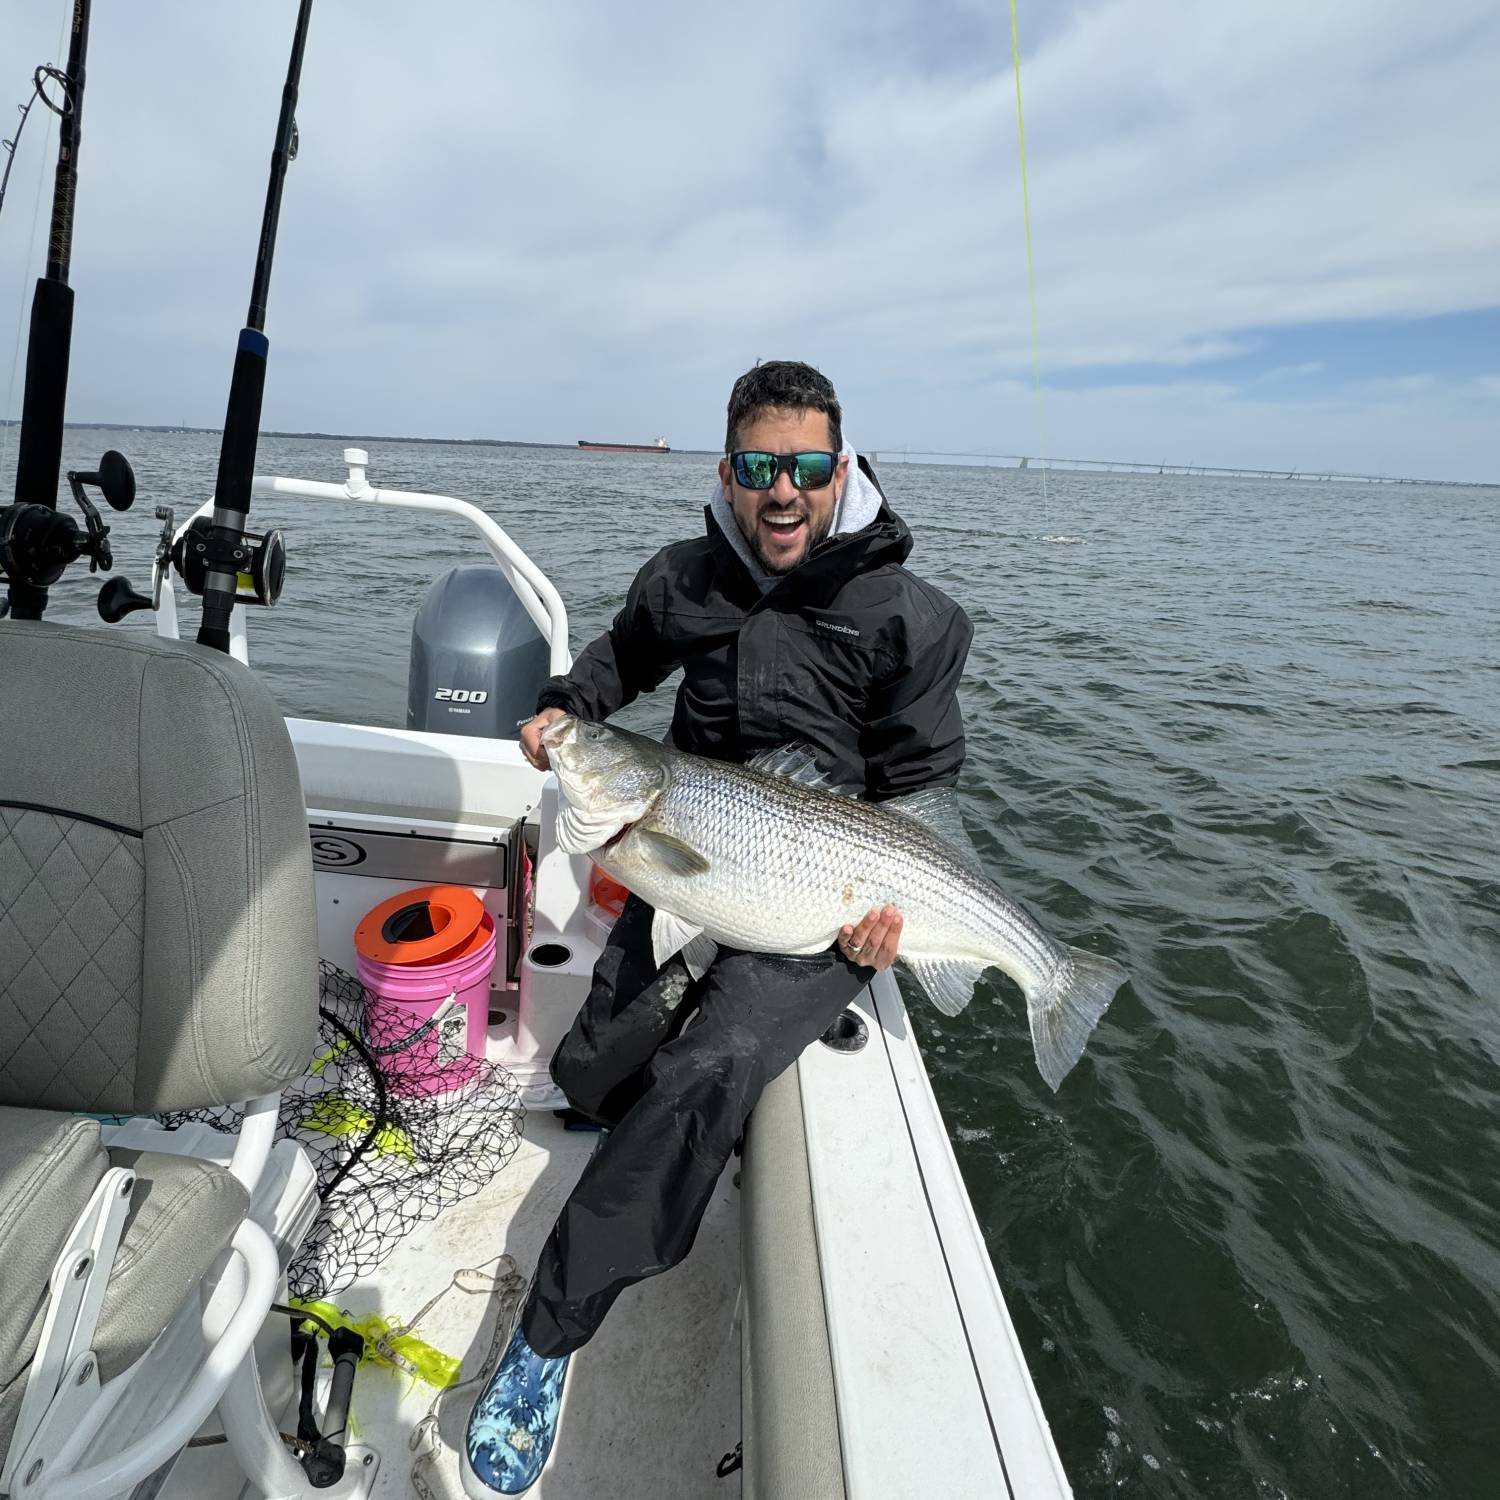 Title: Trophy rockfish in the Chesapeake bay - On board their Sportsman Open 232 Center Console - Location: Chesapeake bay- Just south of the bay brudge. Participating in the Photo Contest #SportsmanApril2024